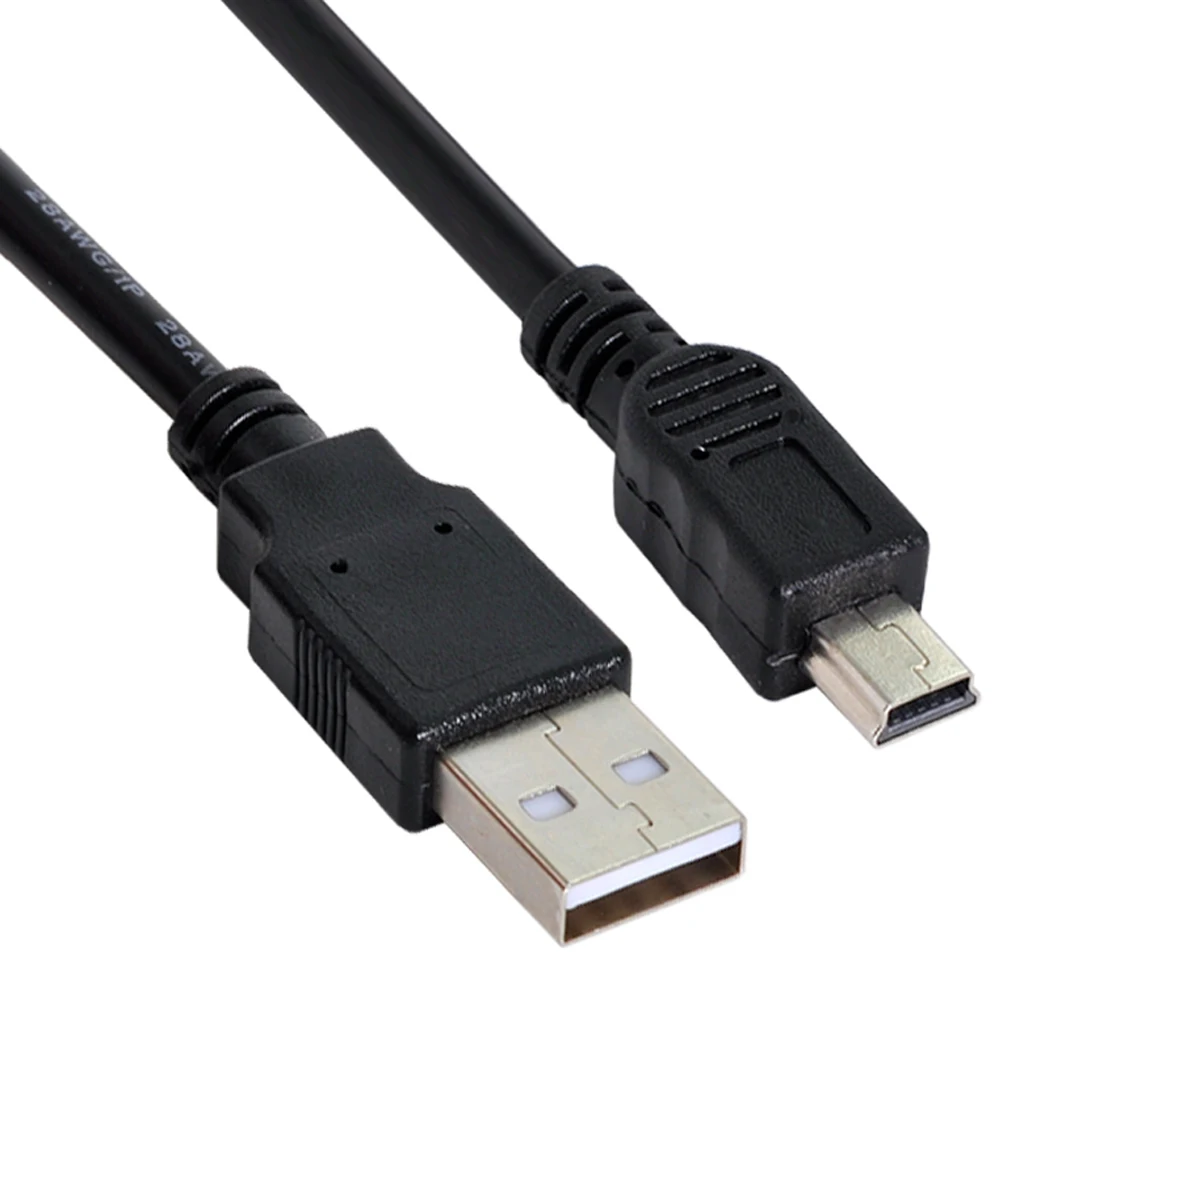 

Chenyang 3m 5m 8m Mini USB 5Pin to USB 2.0 Male Data Cable for Hard Disk & Camera & Phone